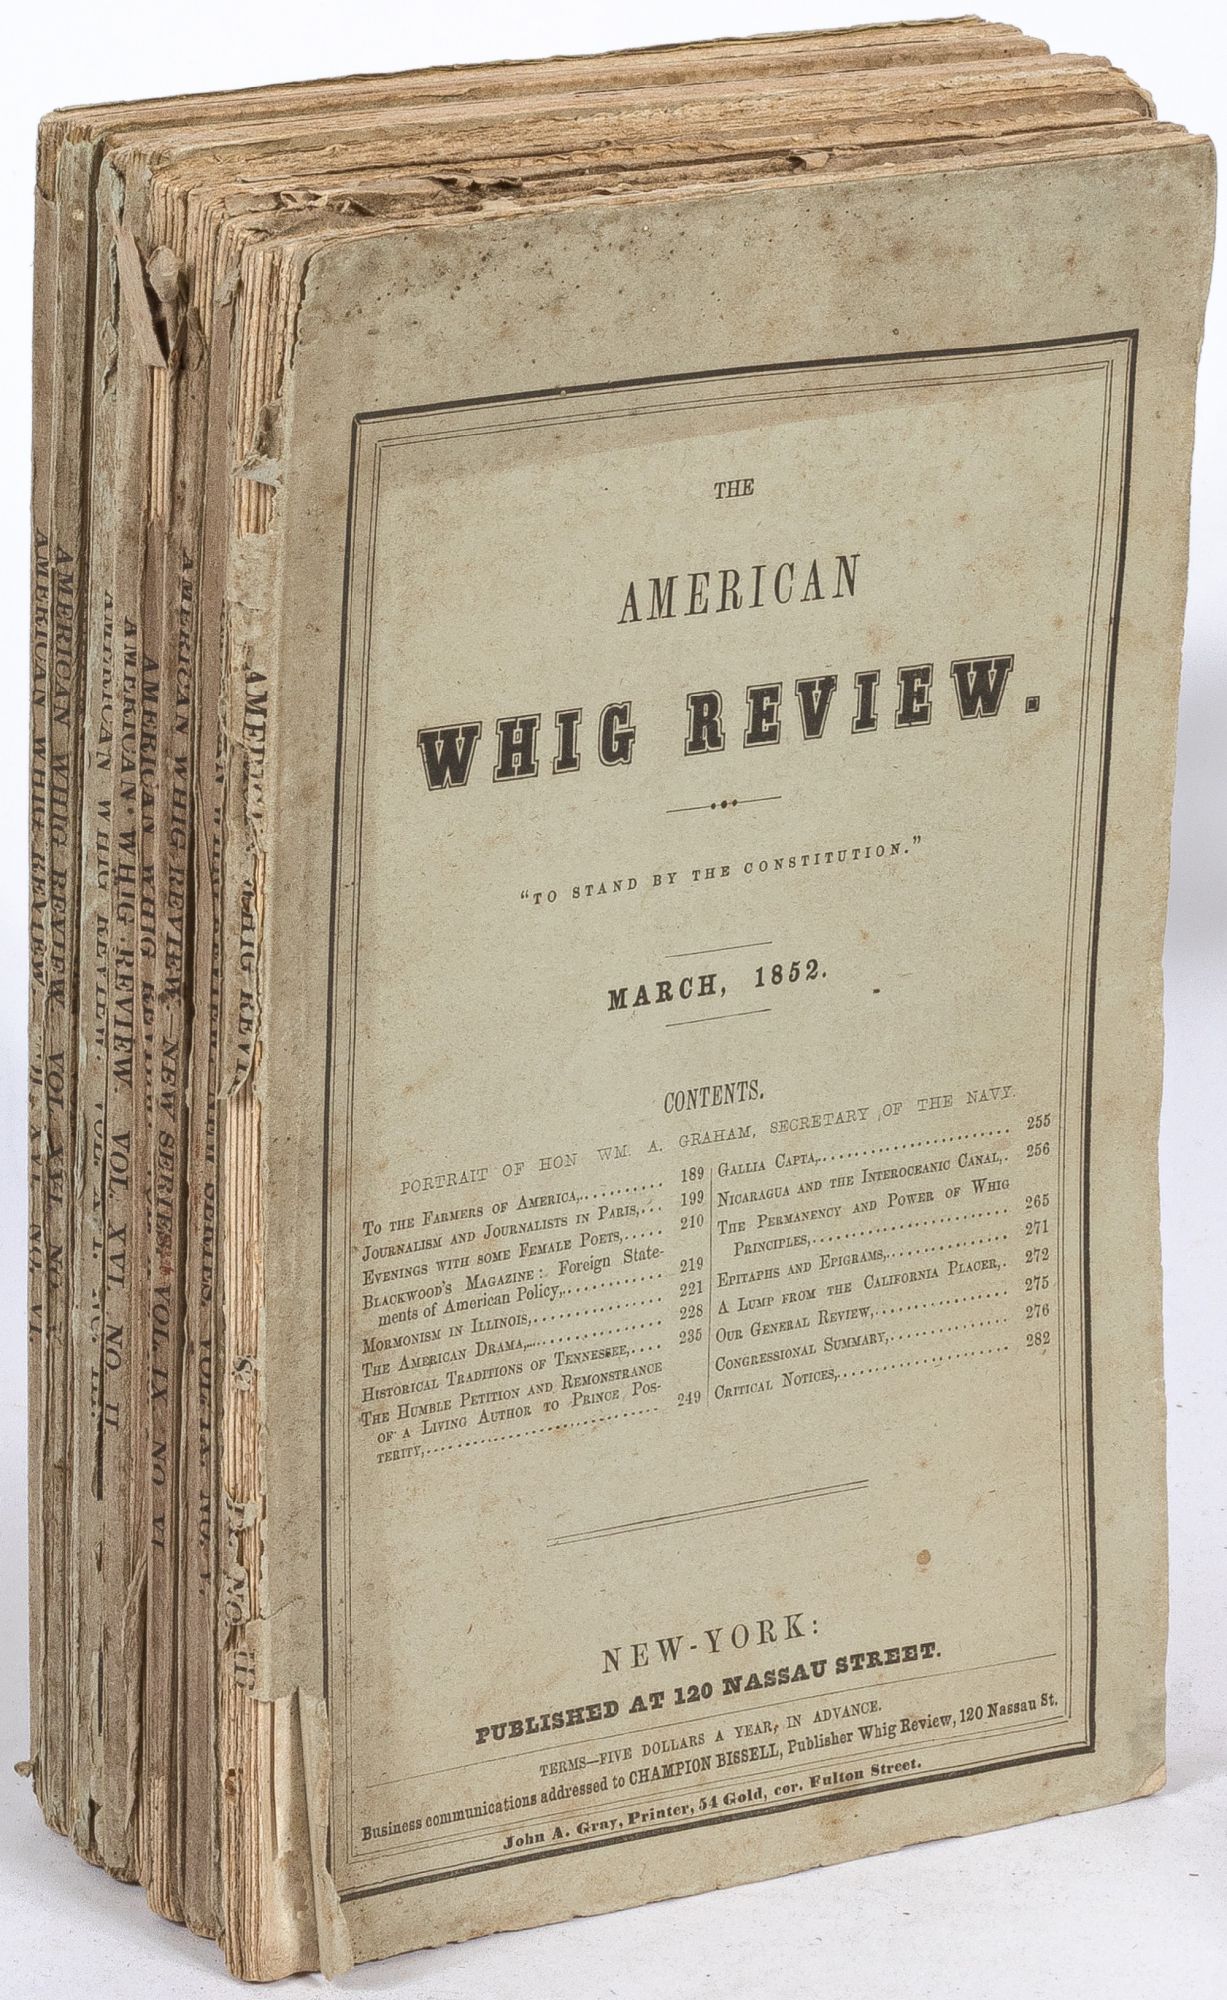 Margaret　by　al.):　Nathaniel　Inc.　ABAA　Fuller　Whig　Melville,　Covers-Rare　Hawthorne,　Dickens,　Ossoli,　Books,　Review　Between　The　the　Softcover　(1852)　(Charles　American　et　Good　(1852)　Herman